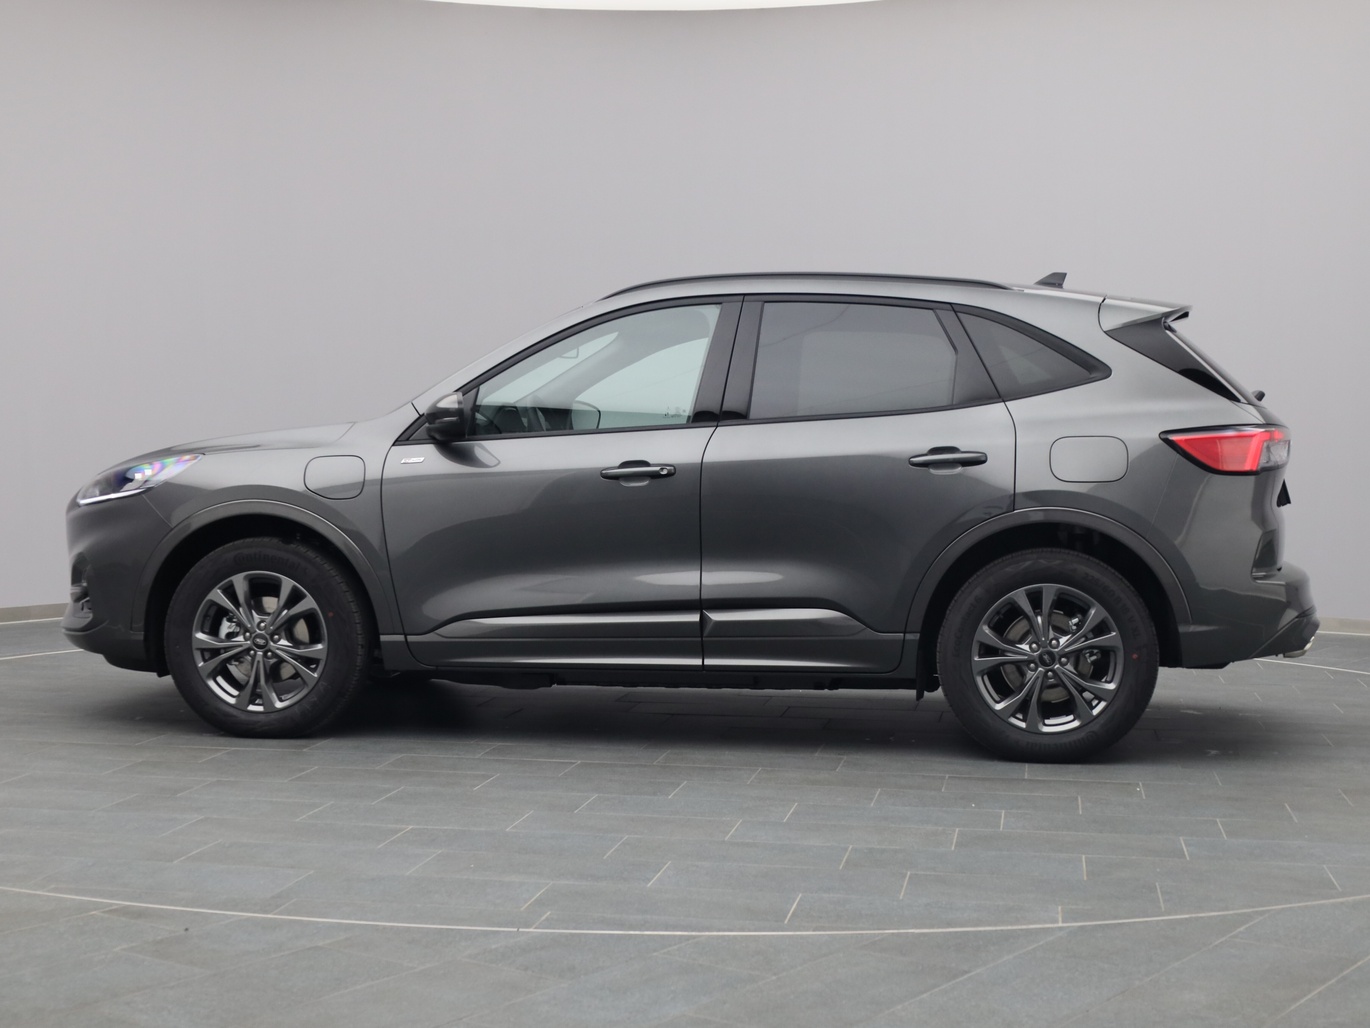  Ford Kuga ST-Line 225PS Plug-in-Hybrid Aut. in Magnetic Grau von Links